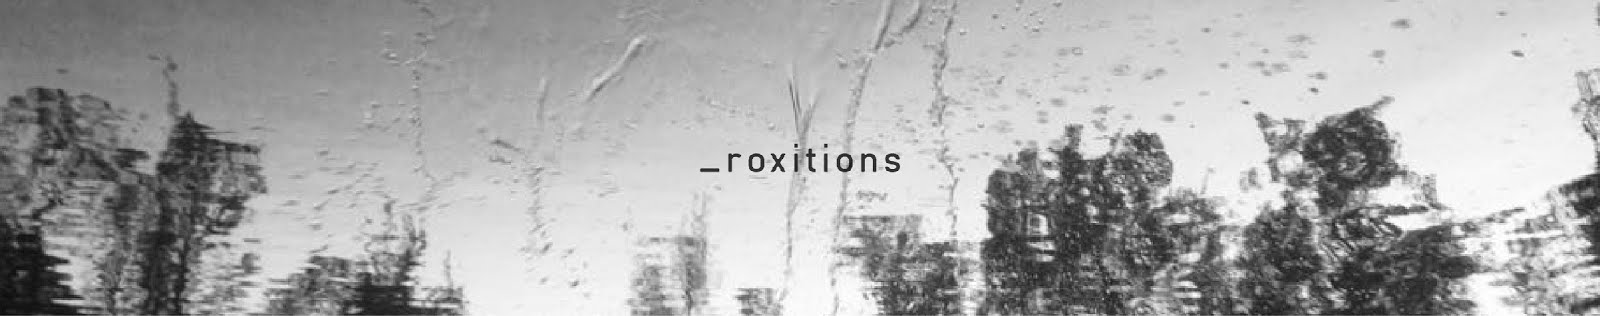 roxitions